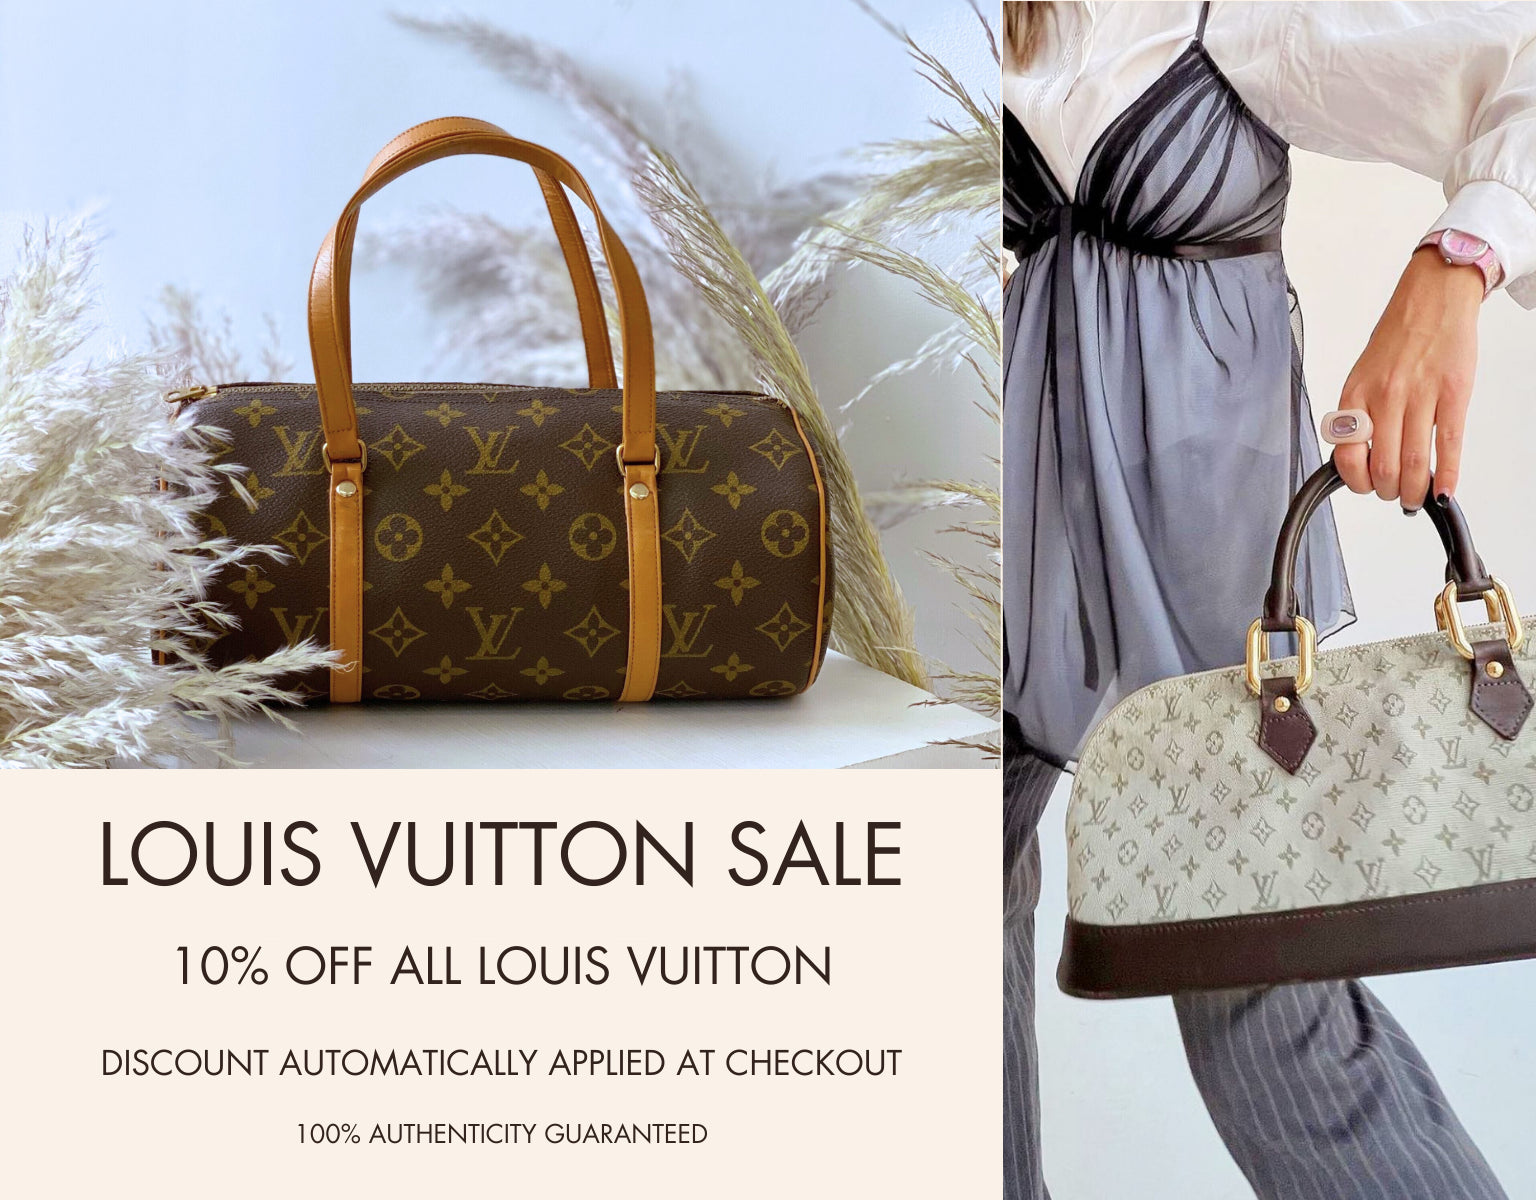 Louis Vuitton To Announce Partnership With The Nba